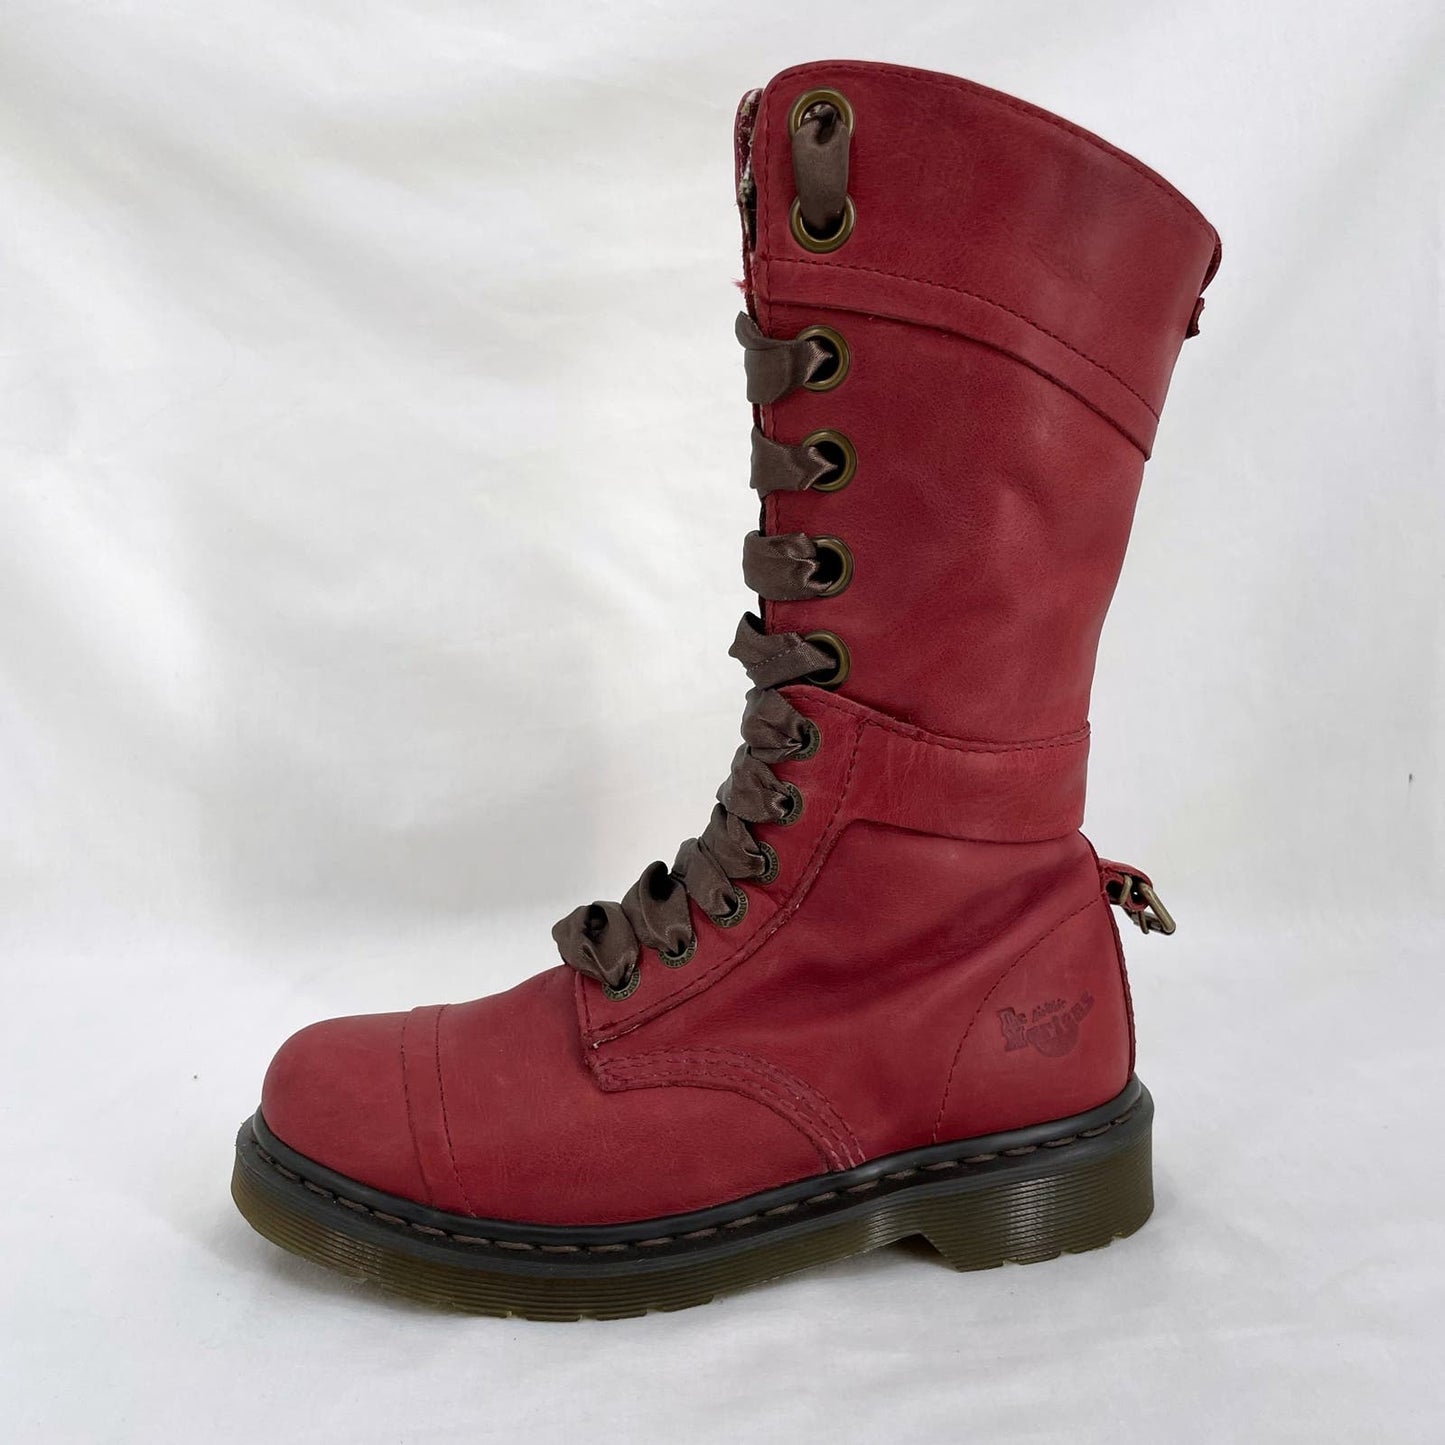 Dr. Martens Triumph Boots Red Oxblood Leather Pirate Fold Down Floral Boots US Size 7